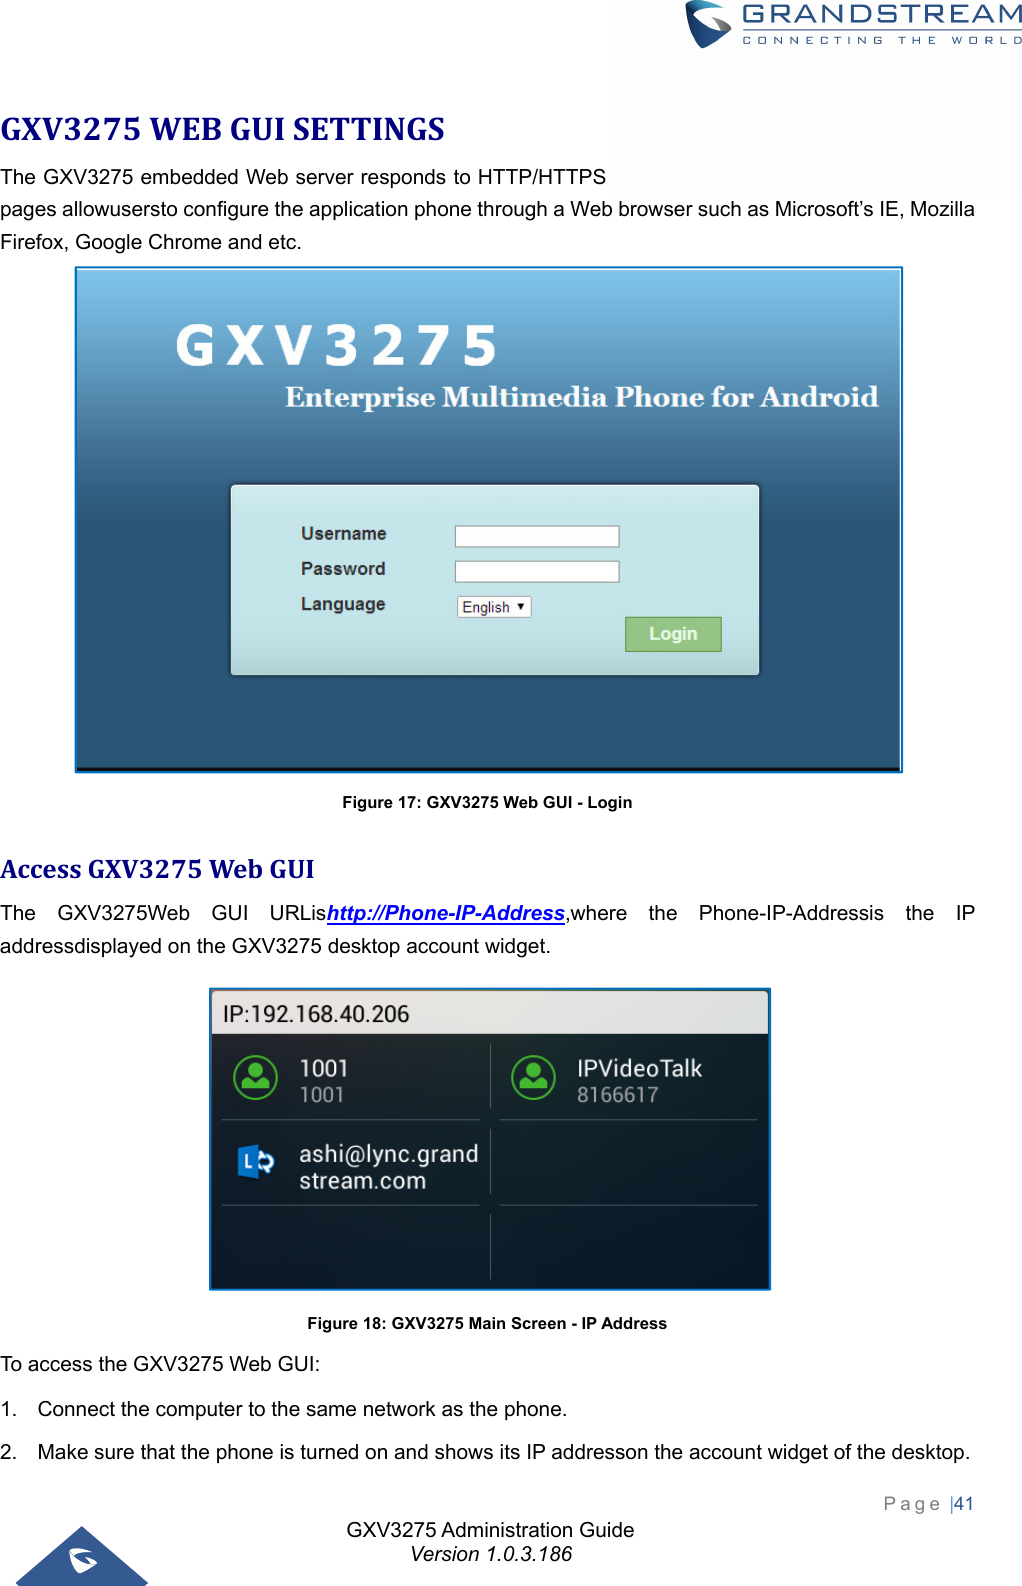 GXV3275 Administration Guide Version 1.0.3.186 Page |41  GXV3275WEBGUISETTINGSThe GXV3275 embedded Web server responds to HTTP/HTTPS GET/POST requests. EmbeddedHTML pages allowusersto configure the application phone through a Web browser such as Microsoft’s IE, Mozilla Firefox, Google Chrome and etc.  Figure 17: GXV3275 Web GUI - Login AccessGXV3275WebGUIThe GXV3275Web GUI URLishttp://Phone-IP-Address,where the Phone-IP-Addressis the IP addressdisplayed on the GXV3275 desktop account widget.  Figure 18: GXV3275 Main Screen - IP Address To access the GXV3275 Web GUI: 1.  Connect the computer to the same network as the phone. 2.  Make sure that the phone is turned on and shows its IP addresson the account widget of the desktop. 